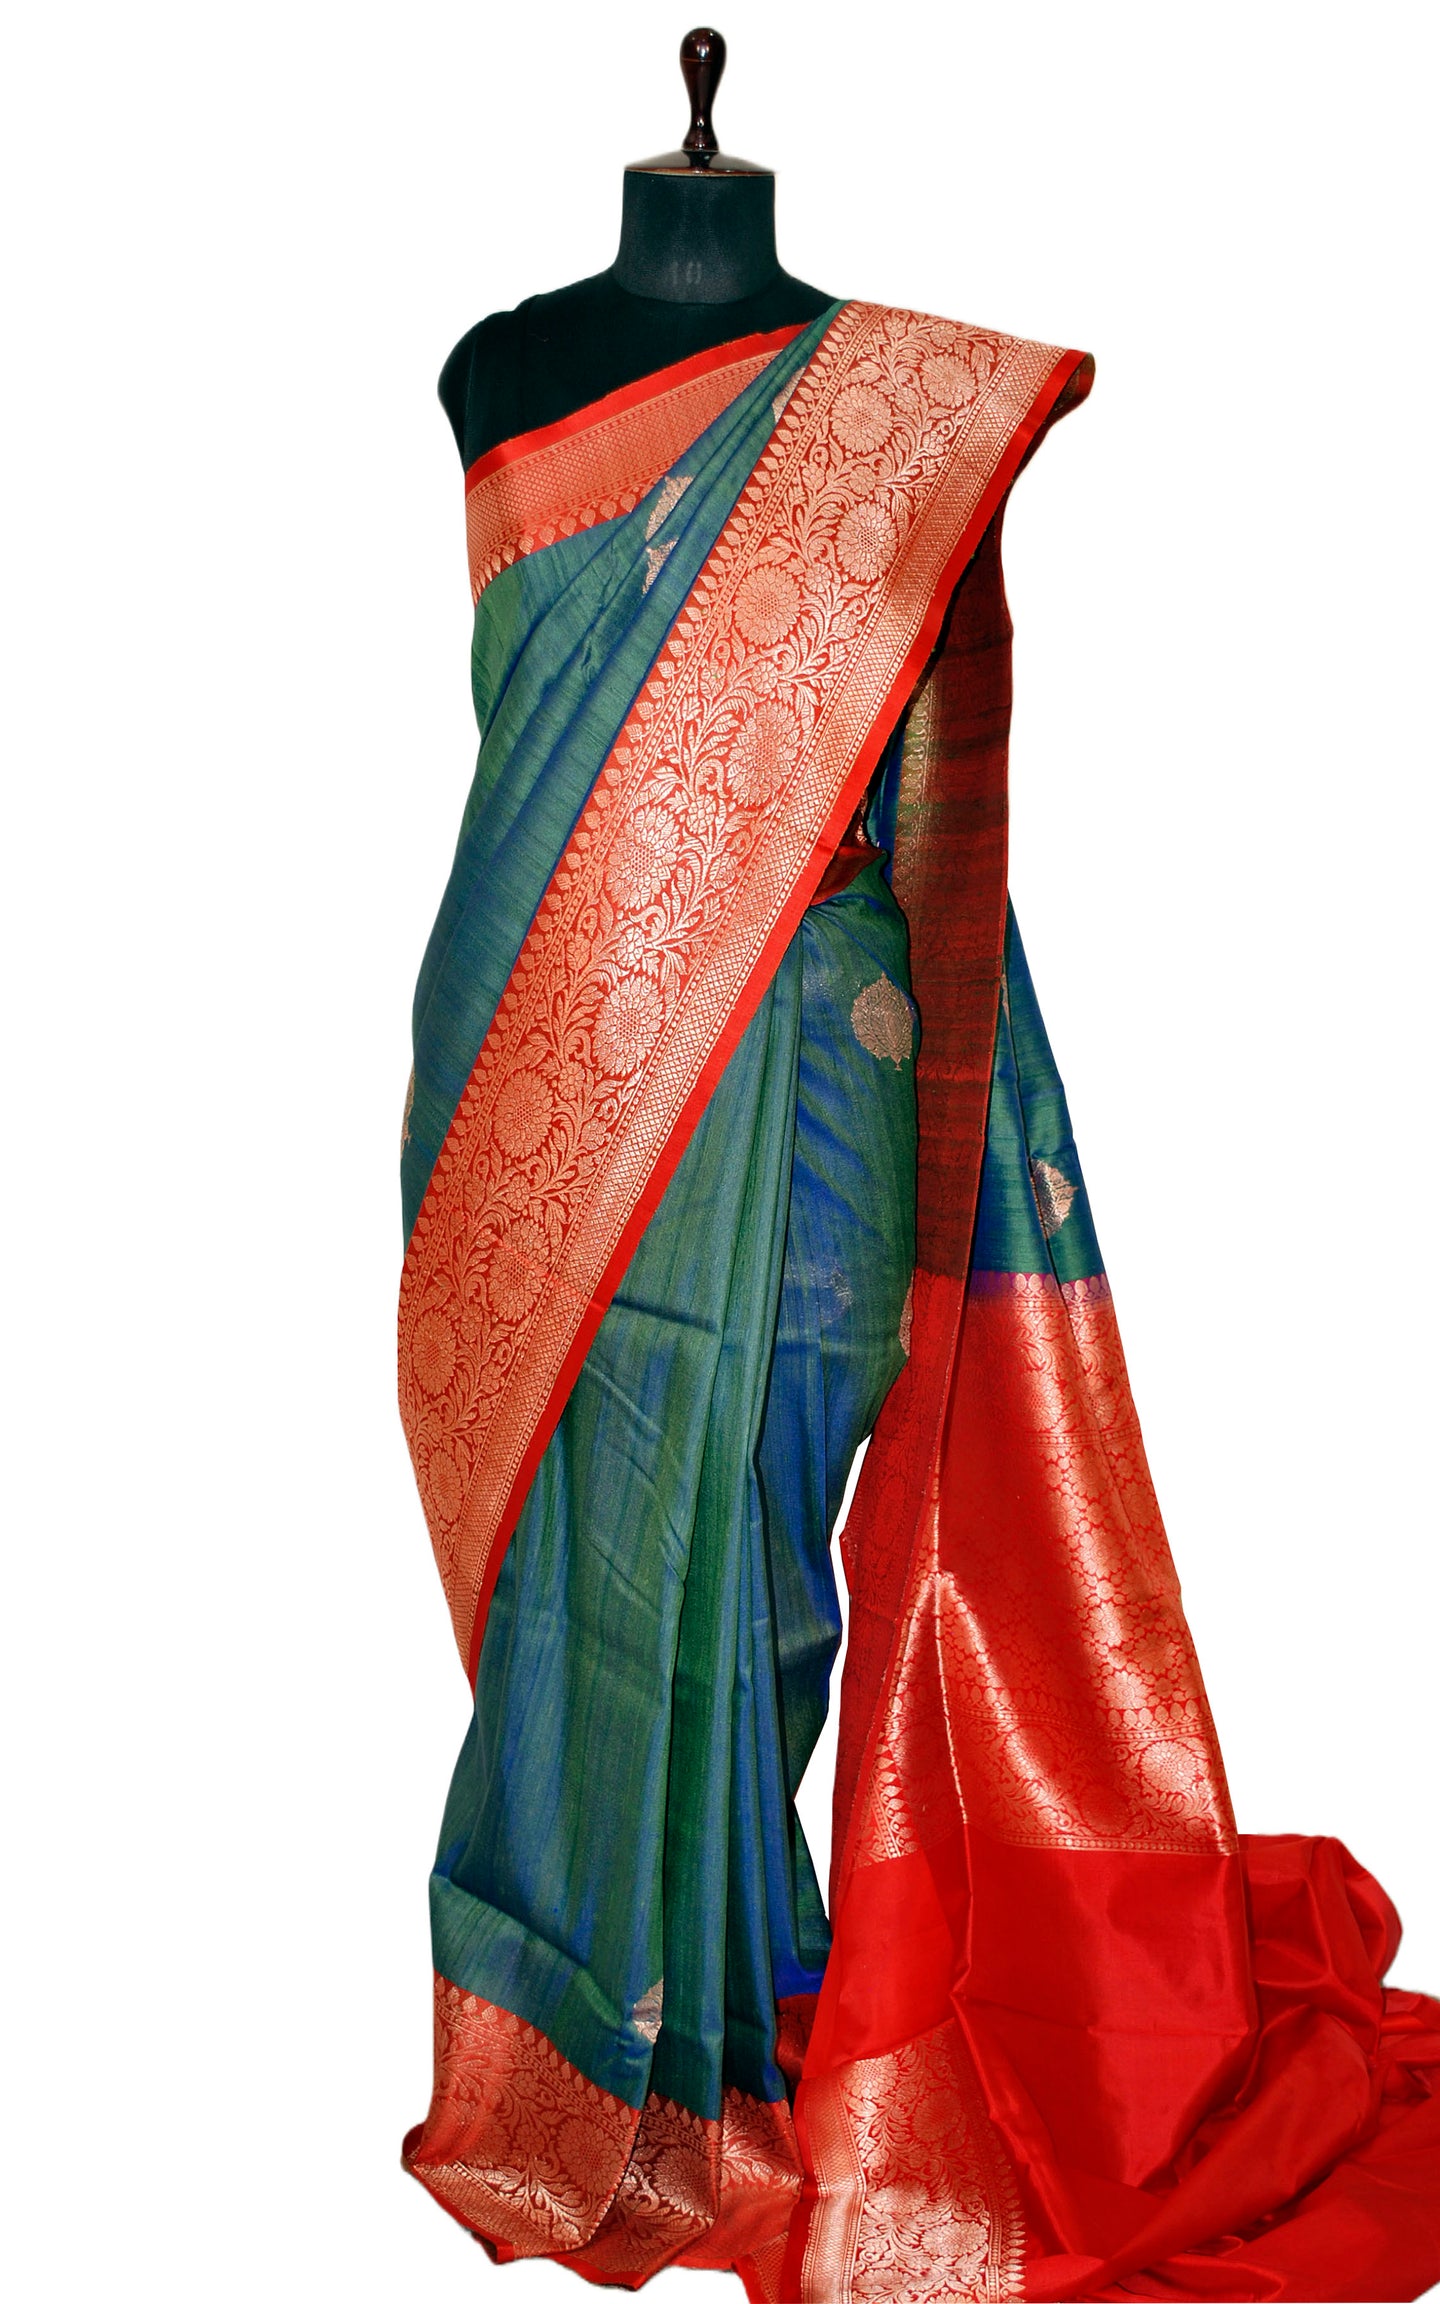 Premium Tussar Banarasi Silk Saree in Cross Color Tone of Myrtle Green and Blue with Red Border